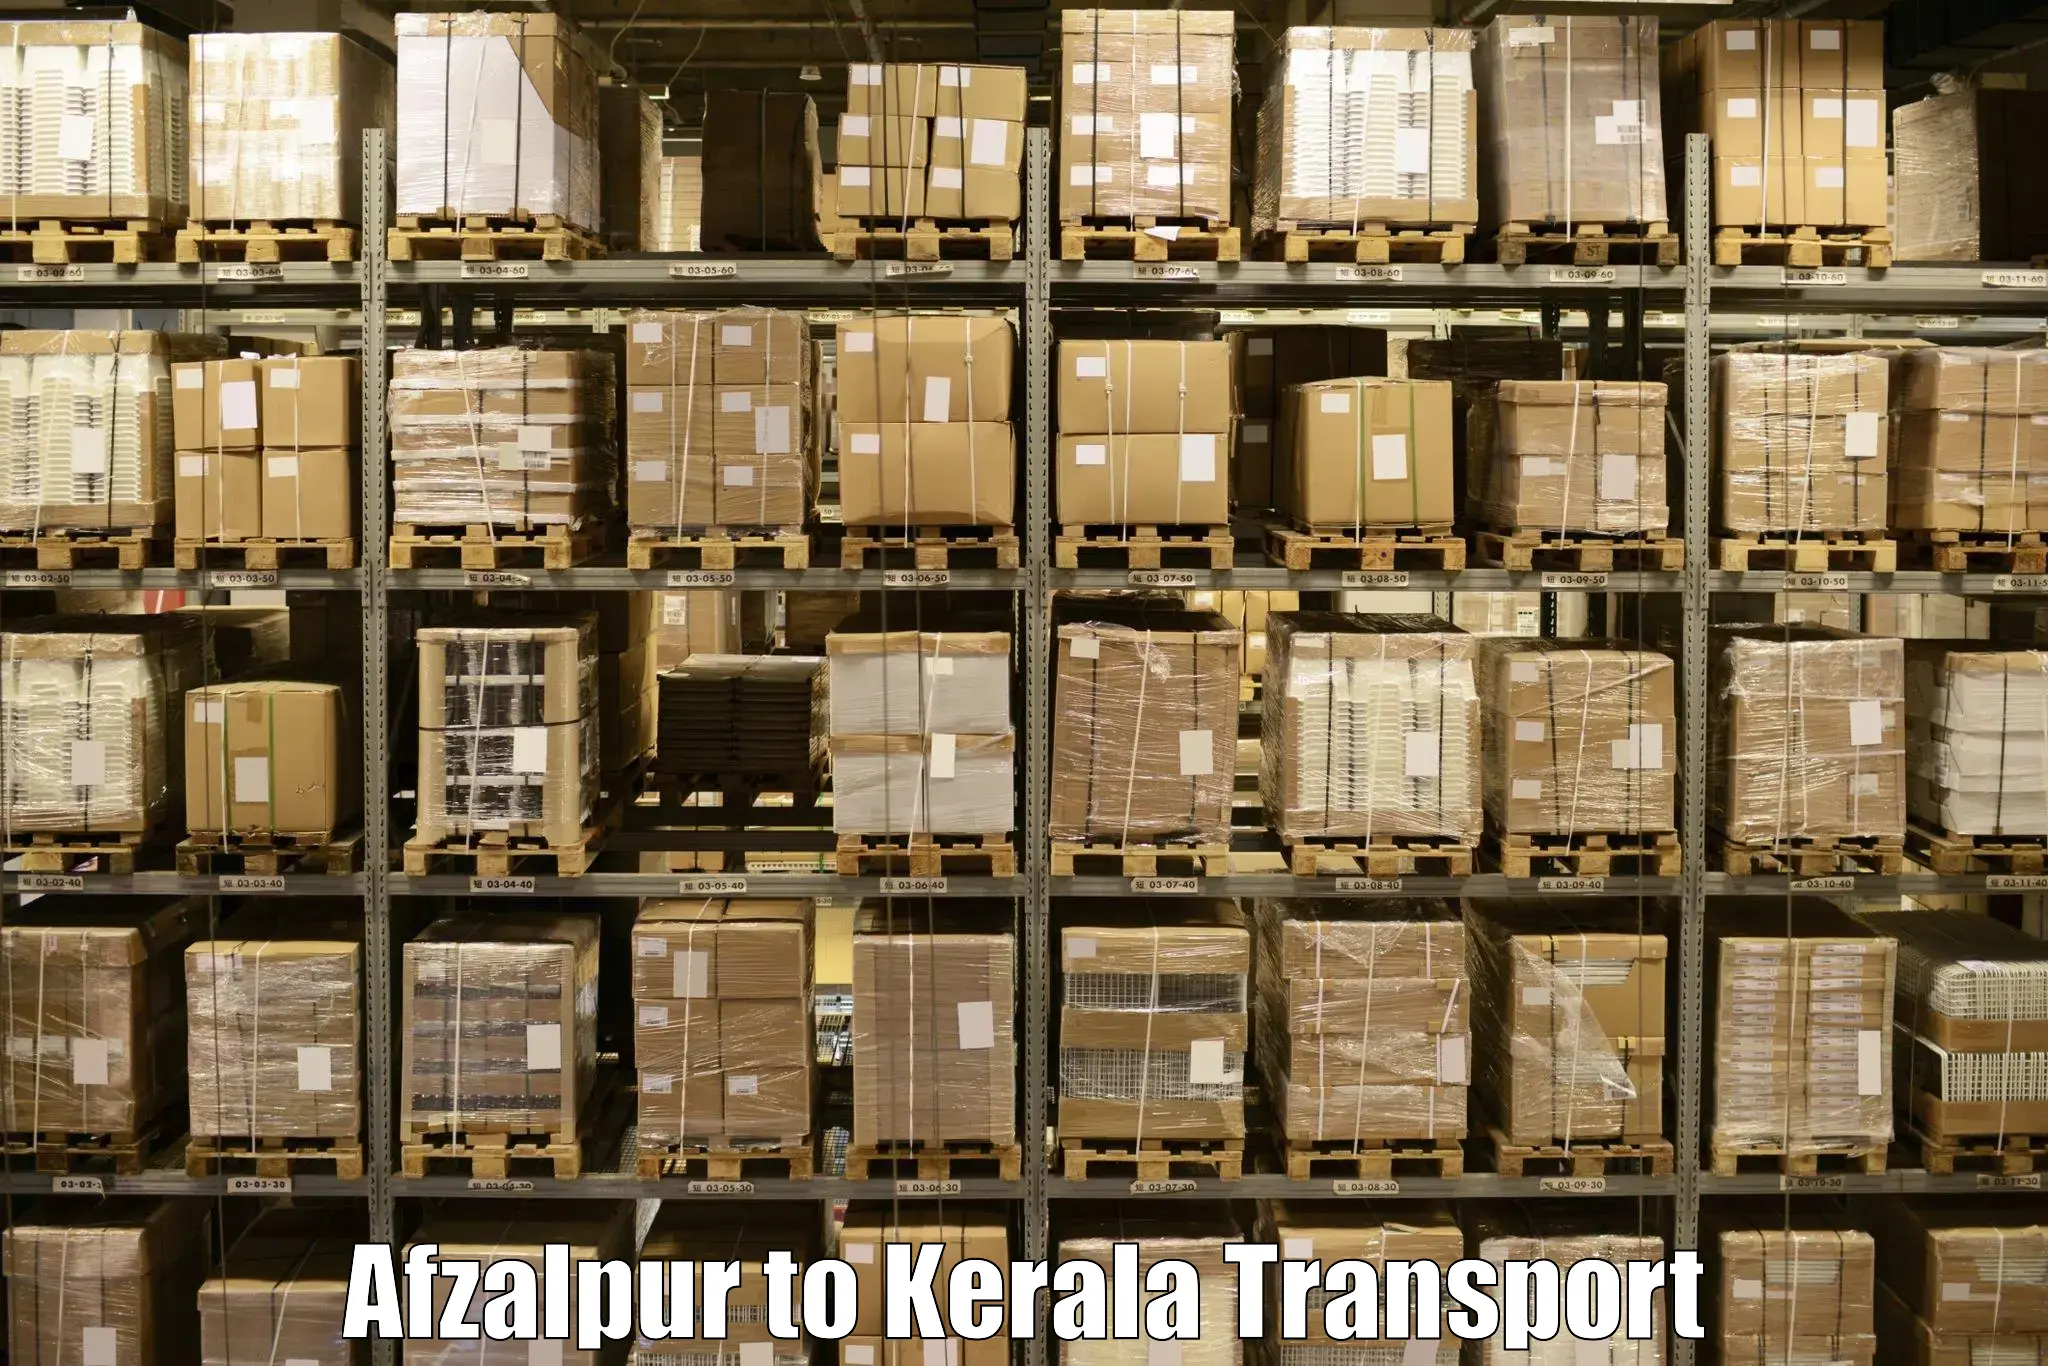 Air freight transport services Afzalpur to Cochin University of Science and Technology